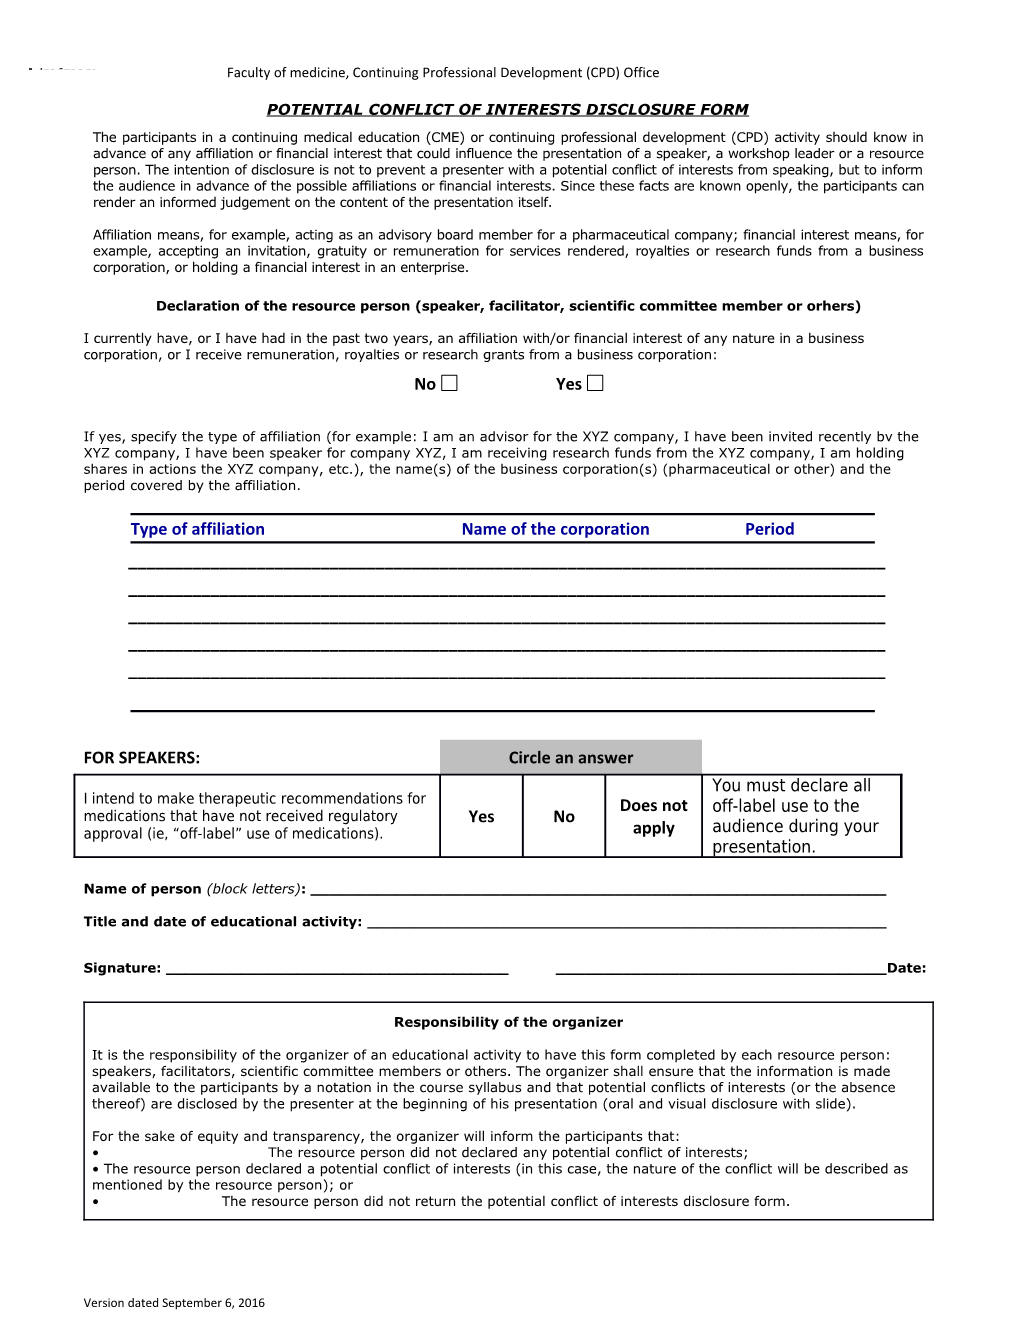 Potential Conflict of Interests Disclosure Form